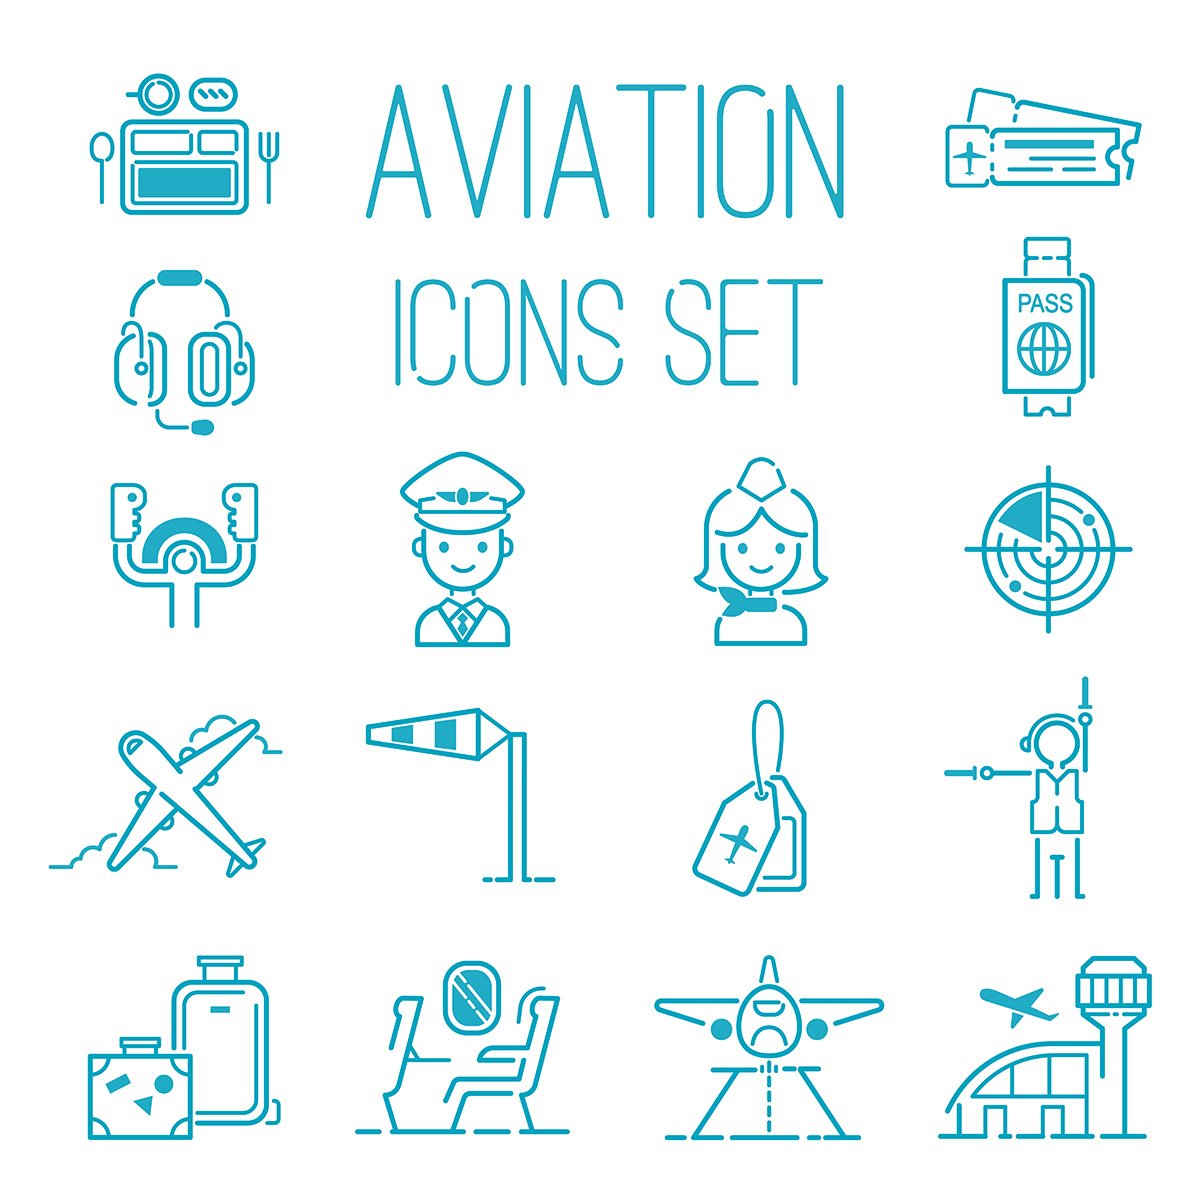 Aviation icons vector set airline cover image.